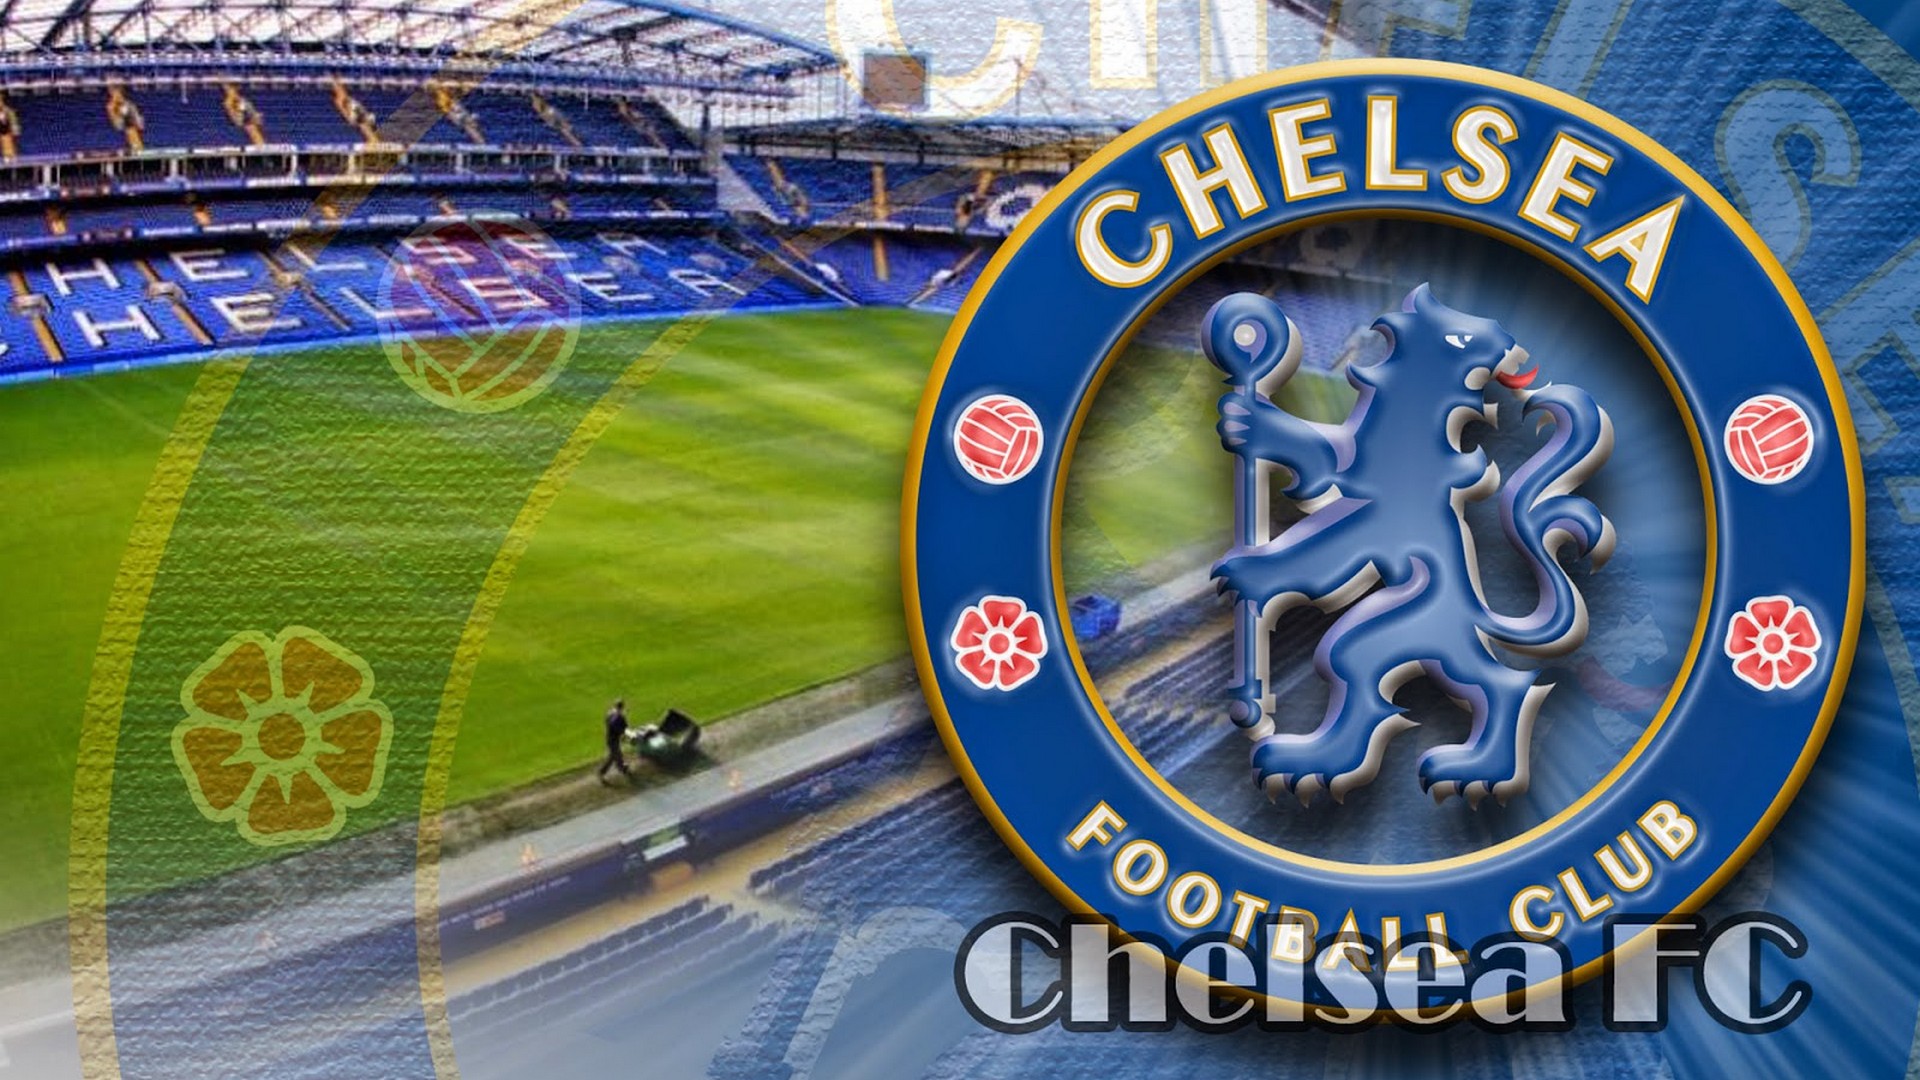 Wallpapers HD Chelsea FC with resolution 1920x1080 pixel. You can make this wallpaper for your Mac or Windows Desktop Background, iPhone, Android or Tablet and another Smartphone device